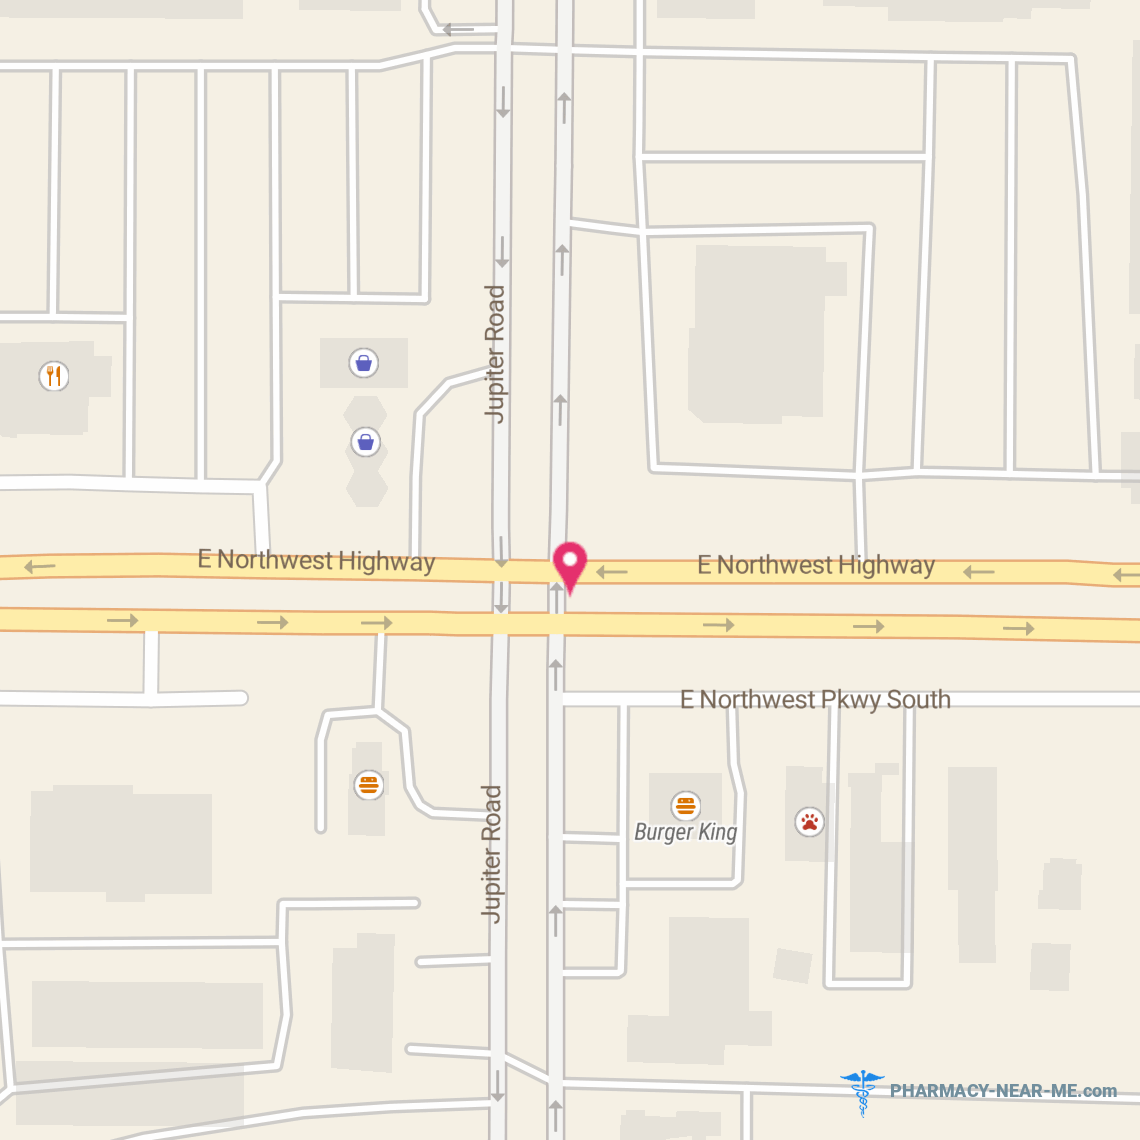 WALGREENS #06891 - Pharmacy Hours, Phone, Reviews & Information: 11403 East Northwest Highway, Dallas, Texas 75218, United States